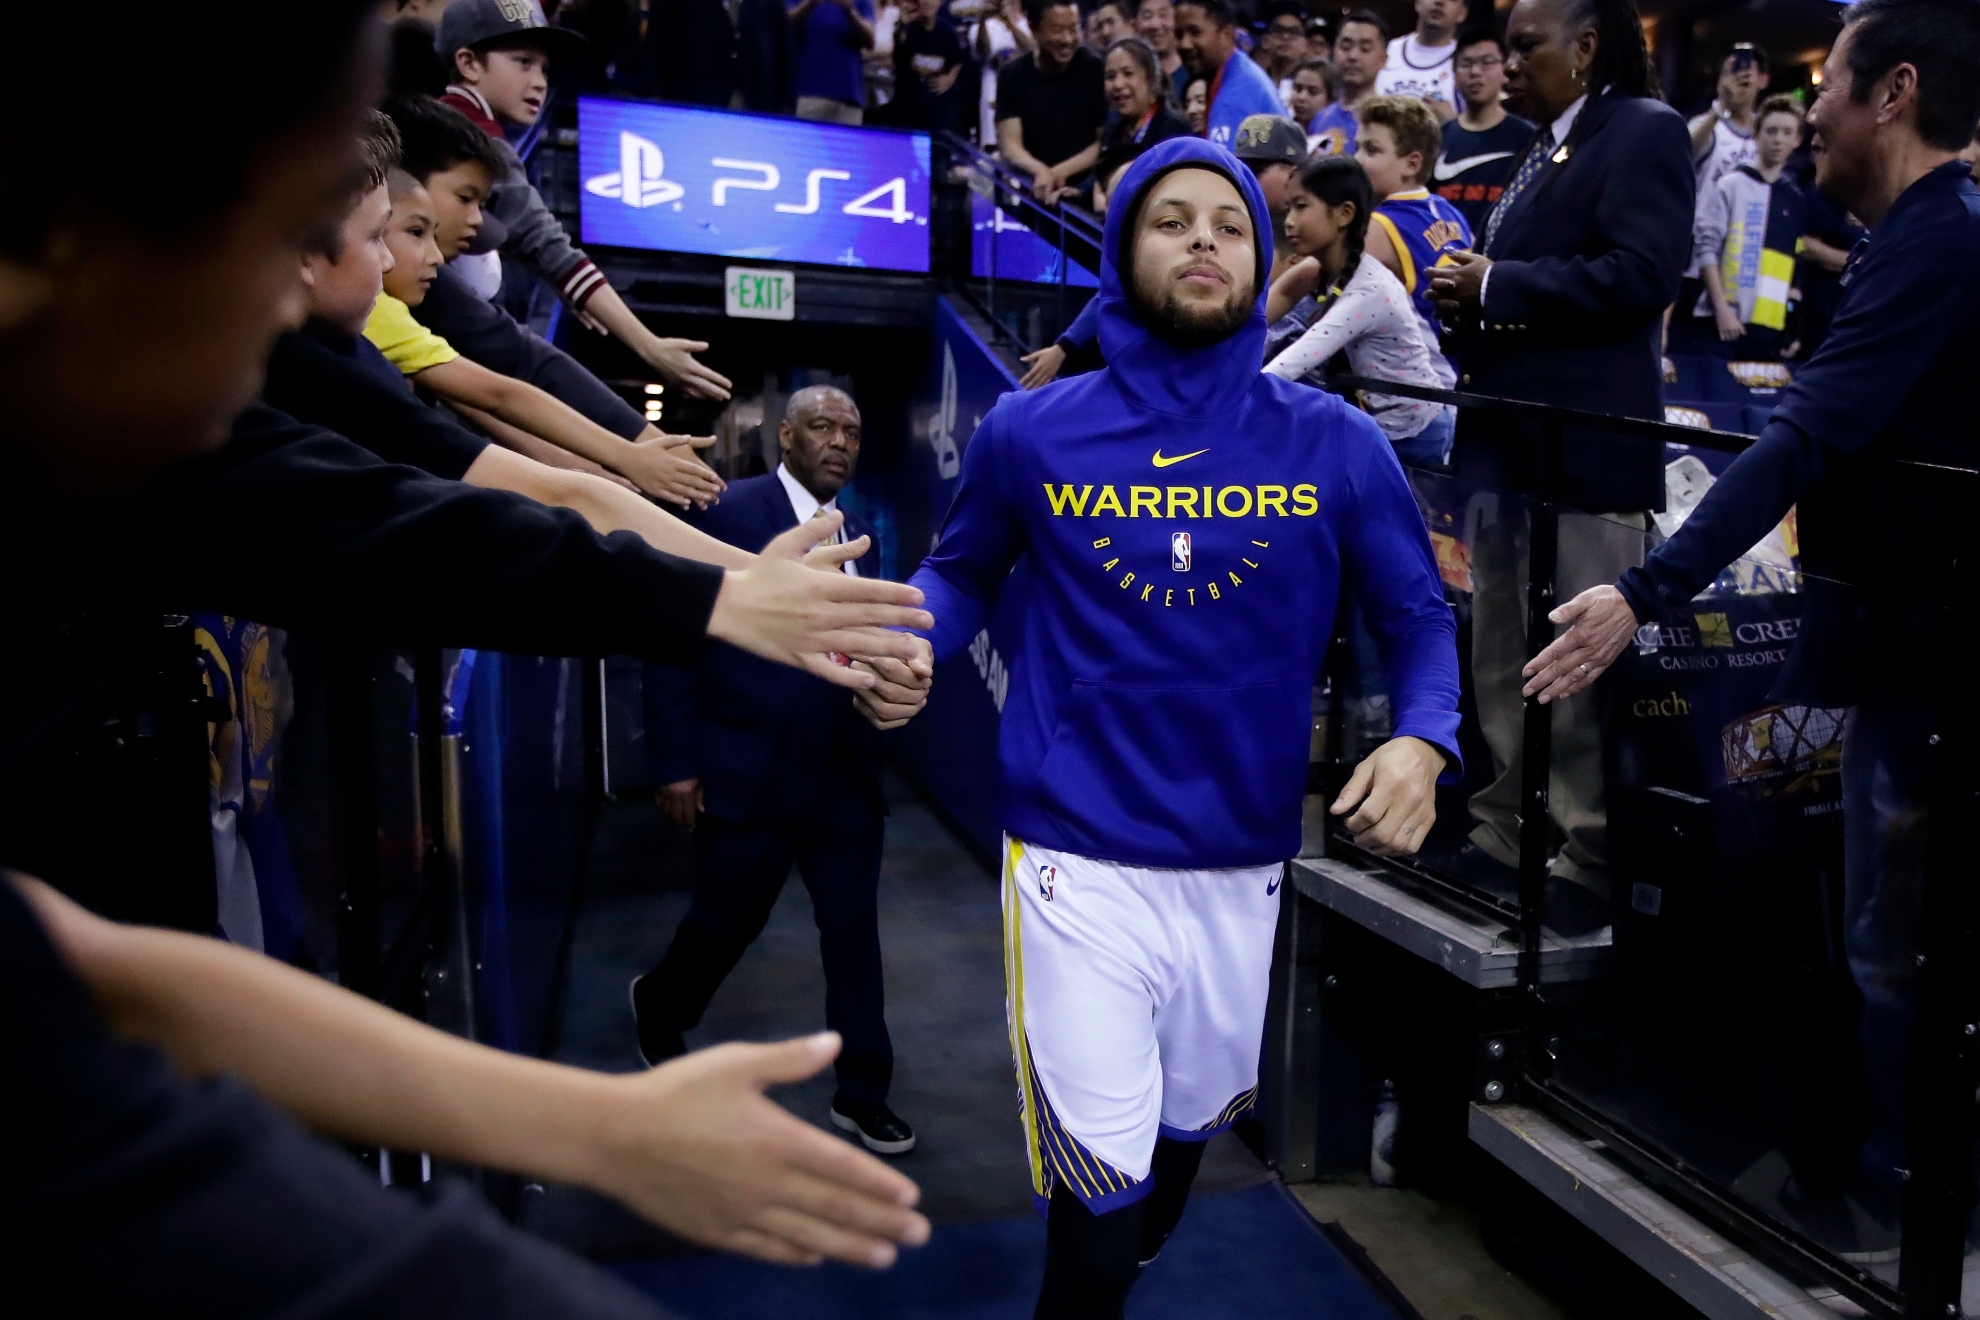 Stephen Curry enters the court